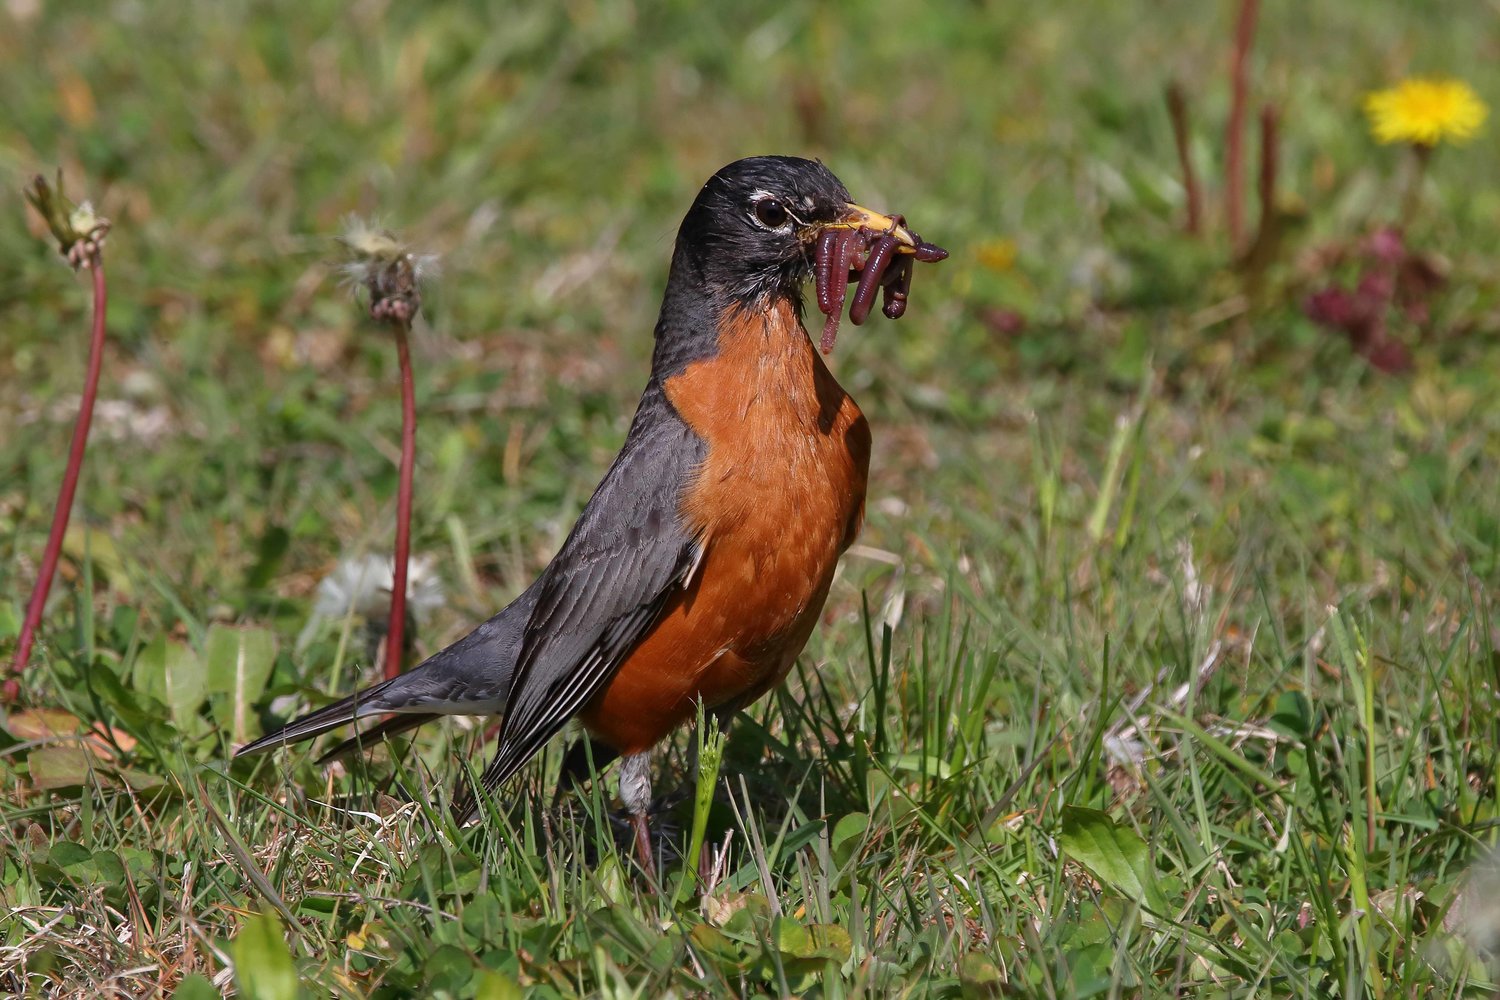 It is said that the early bird gets the worm, and here is ample proof! Local photographer David B. Soete recently captured this American robin with an abundant breakfast in its beak. Robins are one of the earliest birds to be encountered in the Upper Delaware River region in spring, brightening the local landscape with their cheerful song and orange breast. Keep in mind that robins forage heavily on lawns and are vulnerable to pesticides applied to such areas.